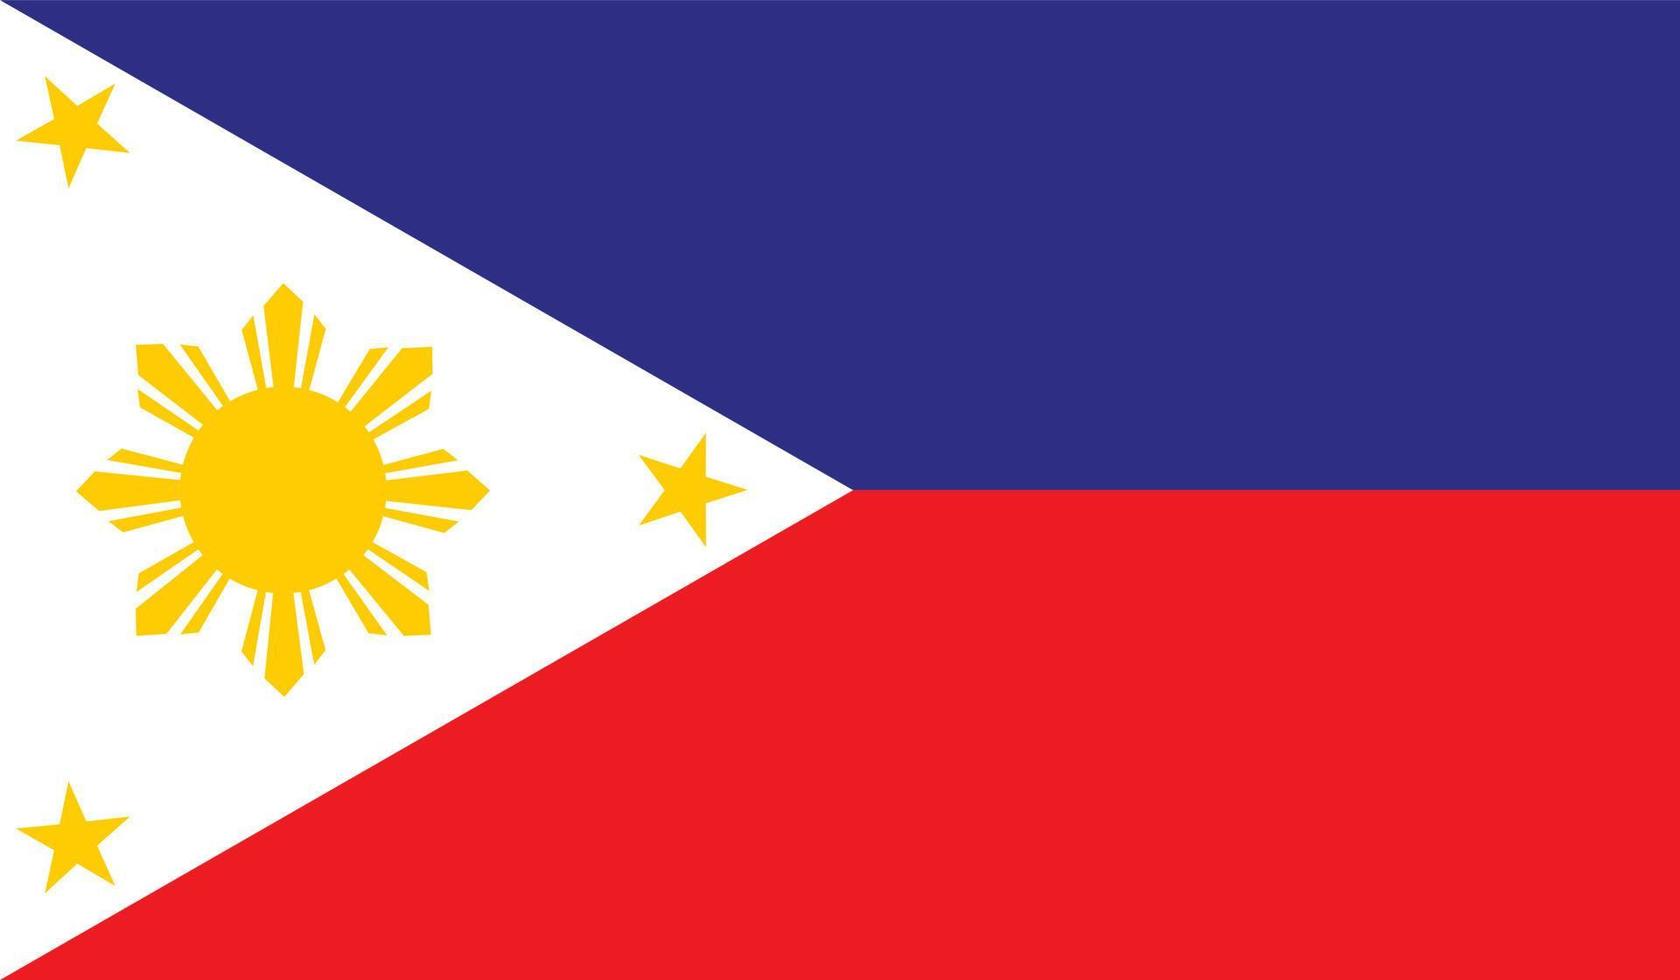 Philippines flag image vector